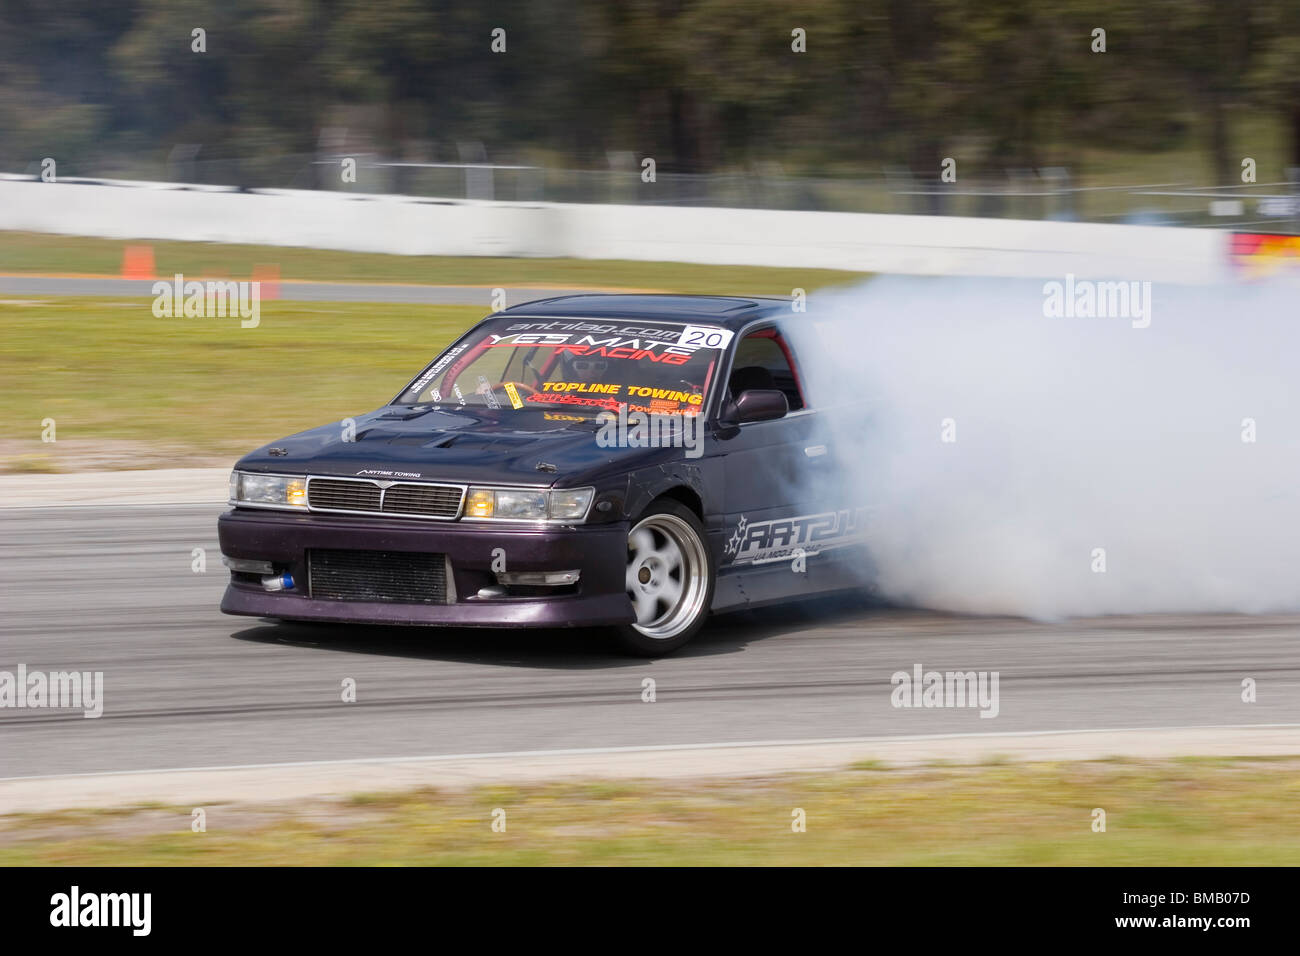 Western Australian drift racer, James Eames, sliding his highly modiified Nissan Laurel around a corner in a drift competition. Stock Photo